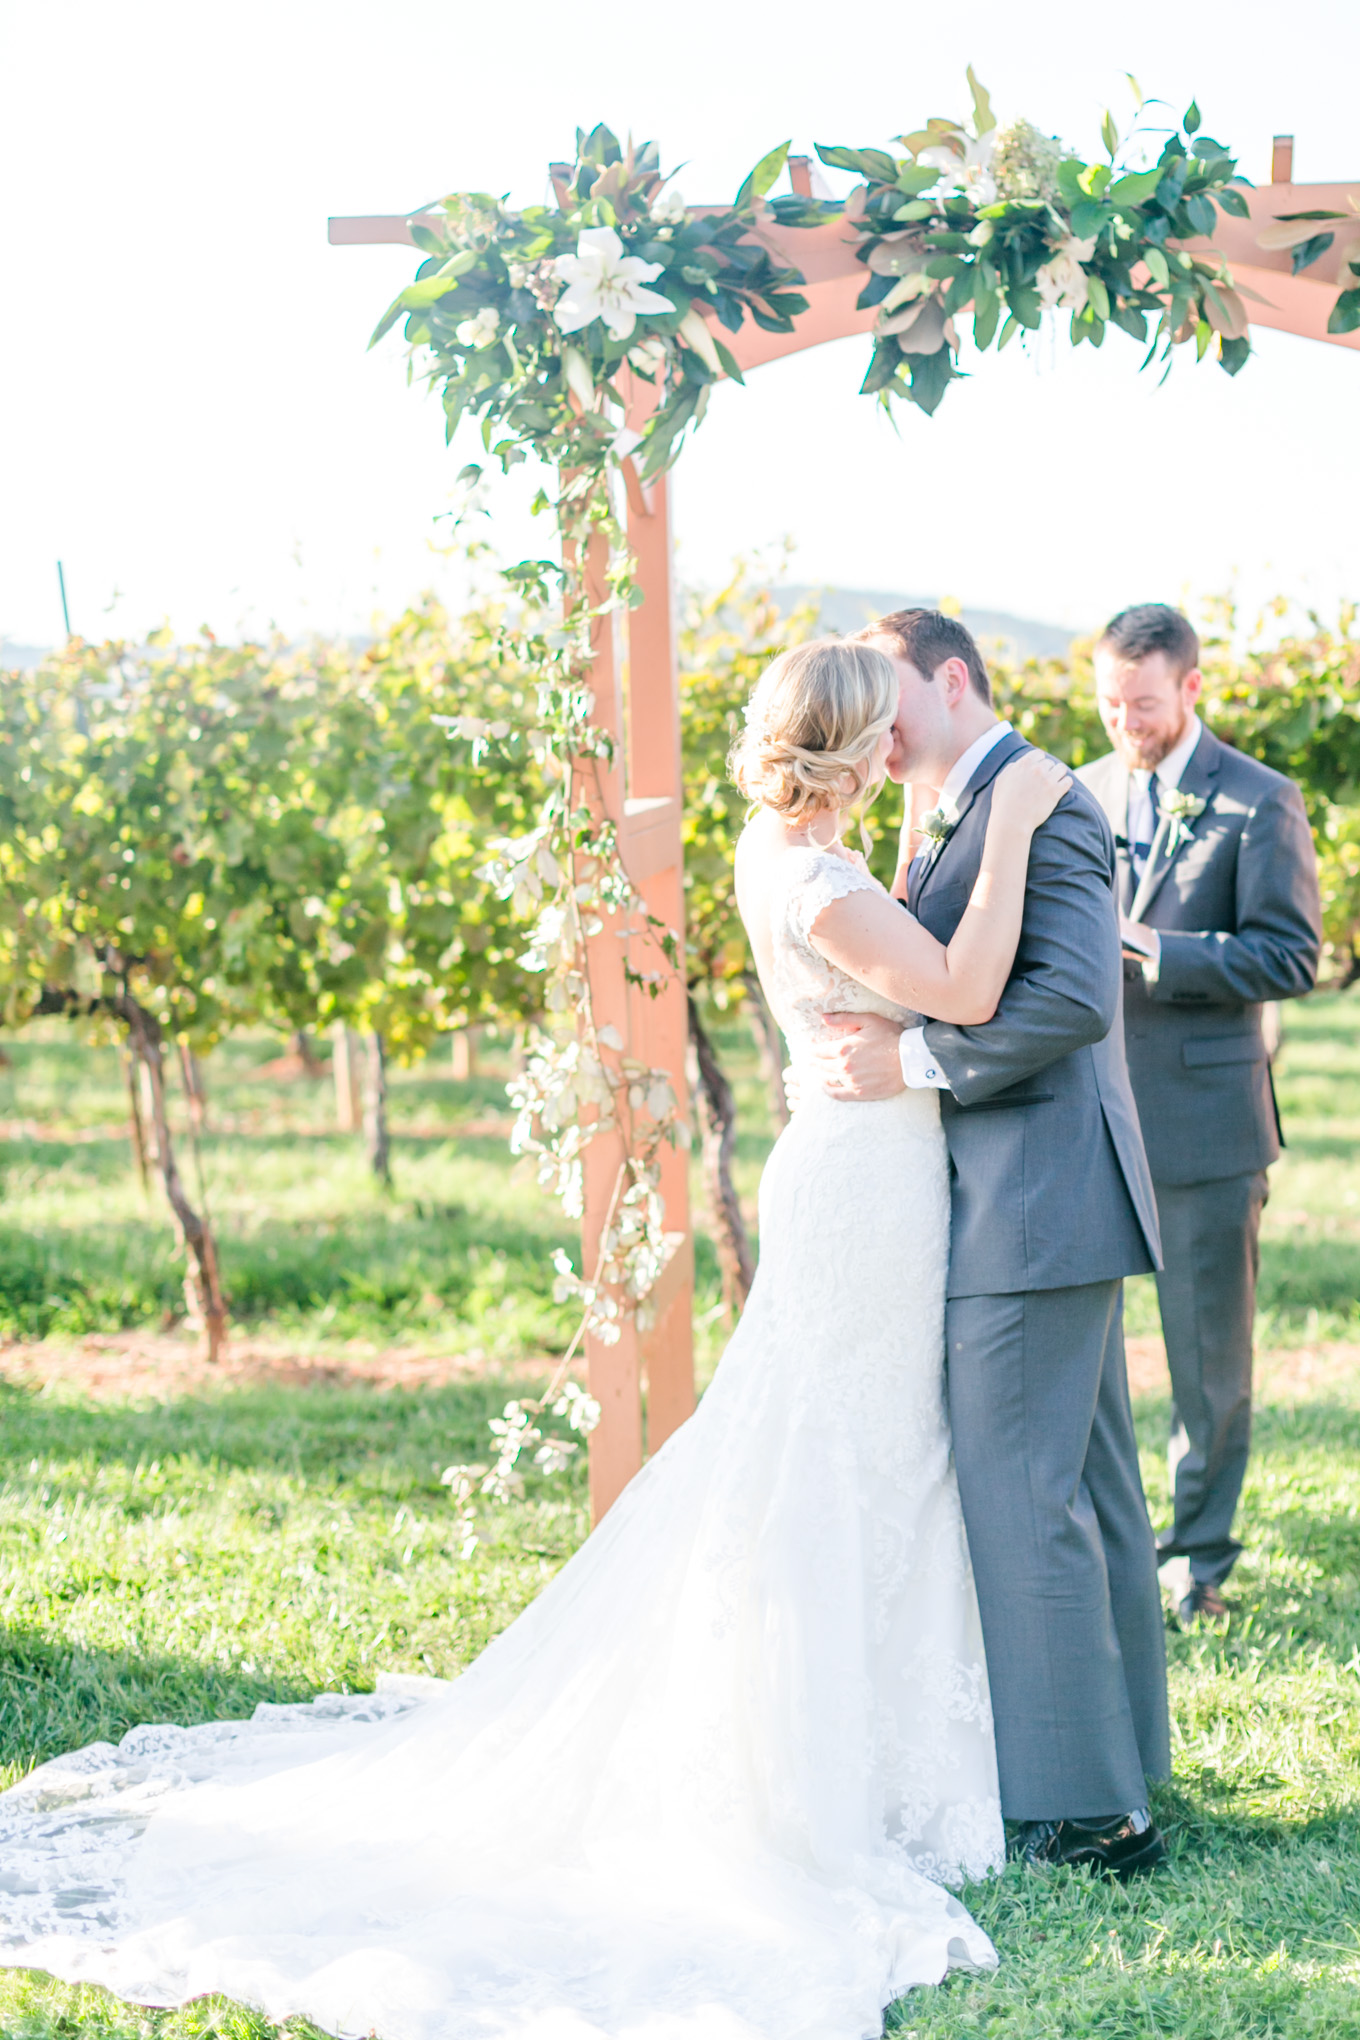 your wedding photography investment, wedding photography, wedding planning, wedding photography planning, photography investment, Keswick Vineyards wedding, Keswick Vineyards, outdoor wedding, first kiss, kiss the bride